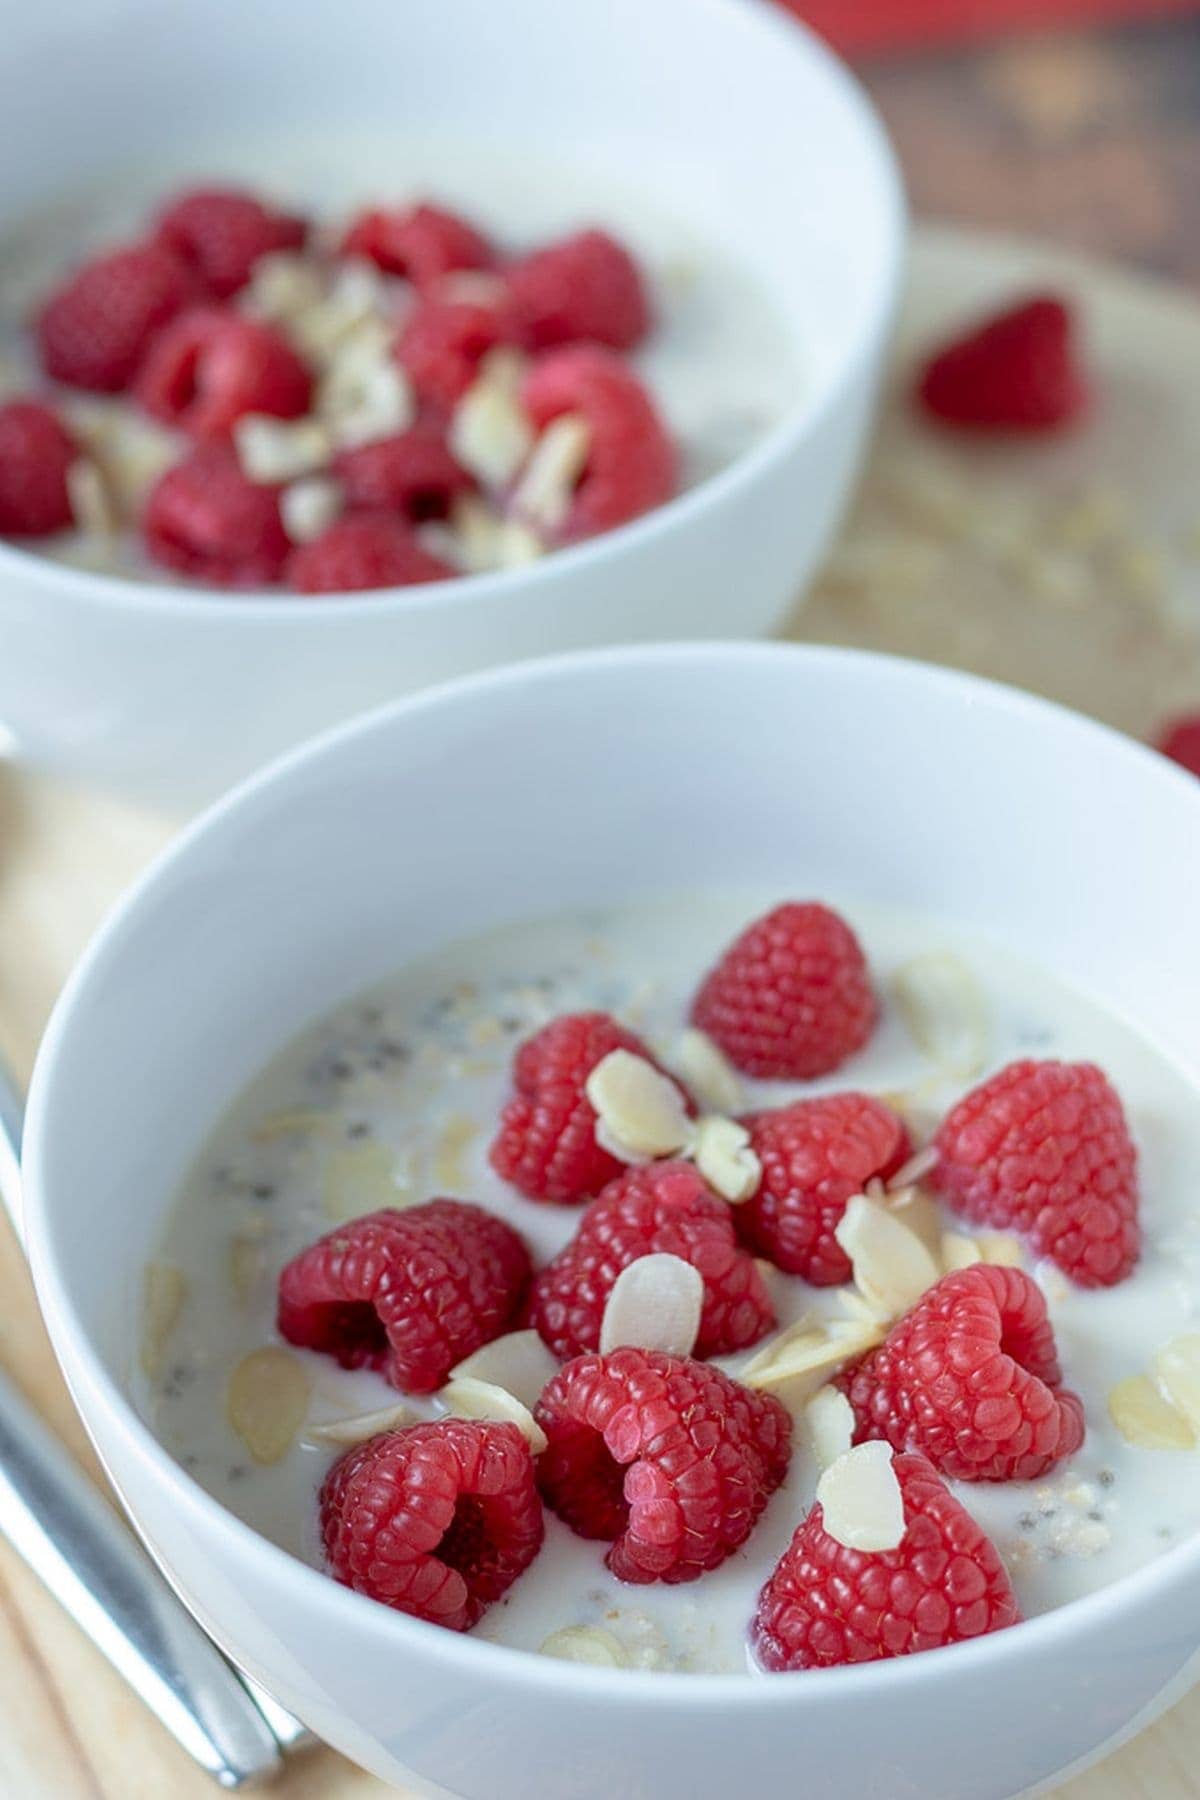 Raspberry overnight oats with almonds in two bowls one in front of the other served and ready to eat.